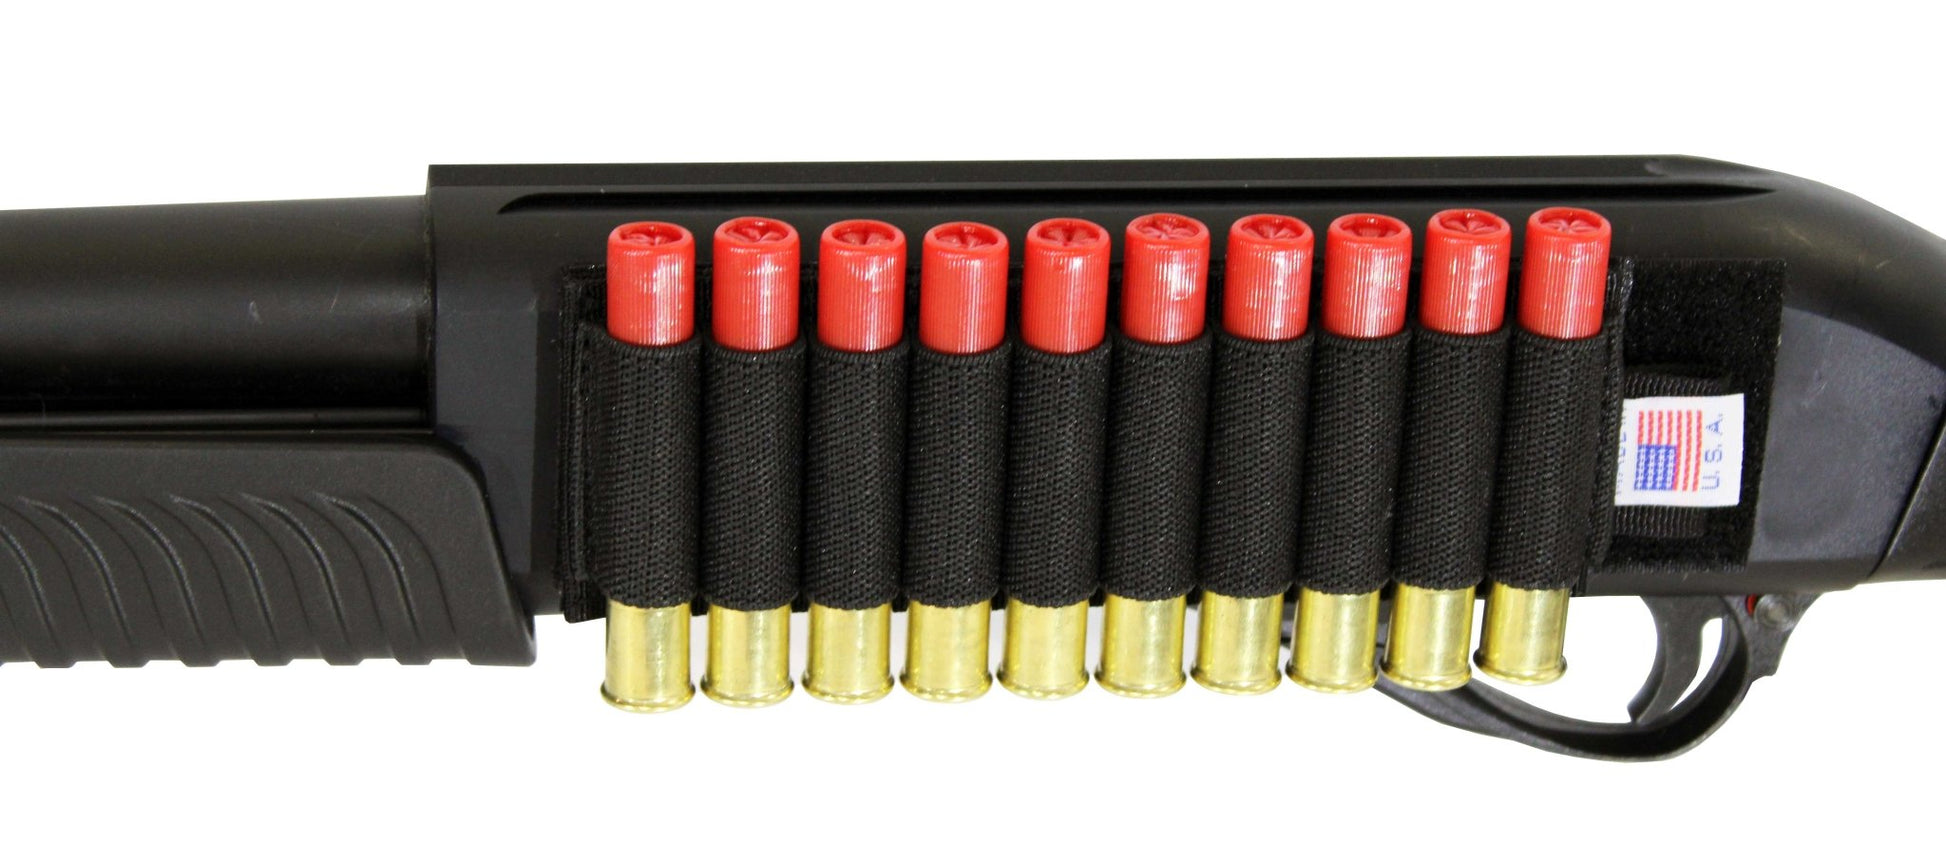 Trinity Shell Carrier Ammo Pouch Compatible with Tristar Viper G2 .410 bore. - TRINITY SUPPLY INC